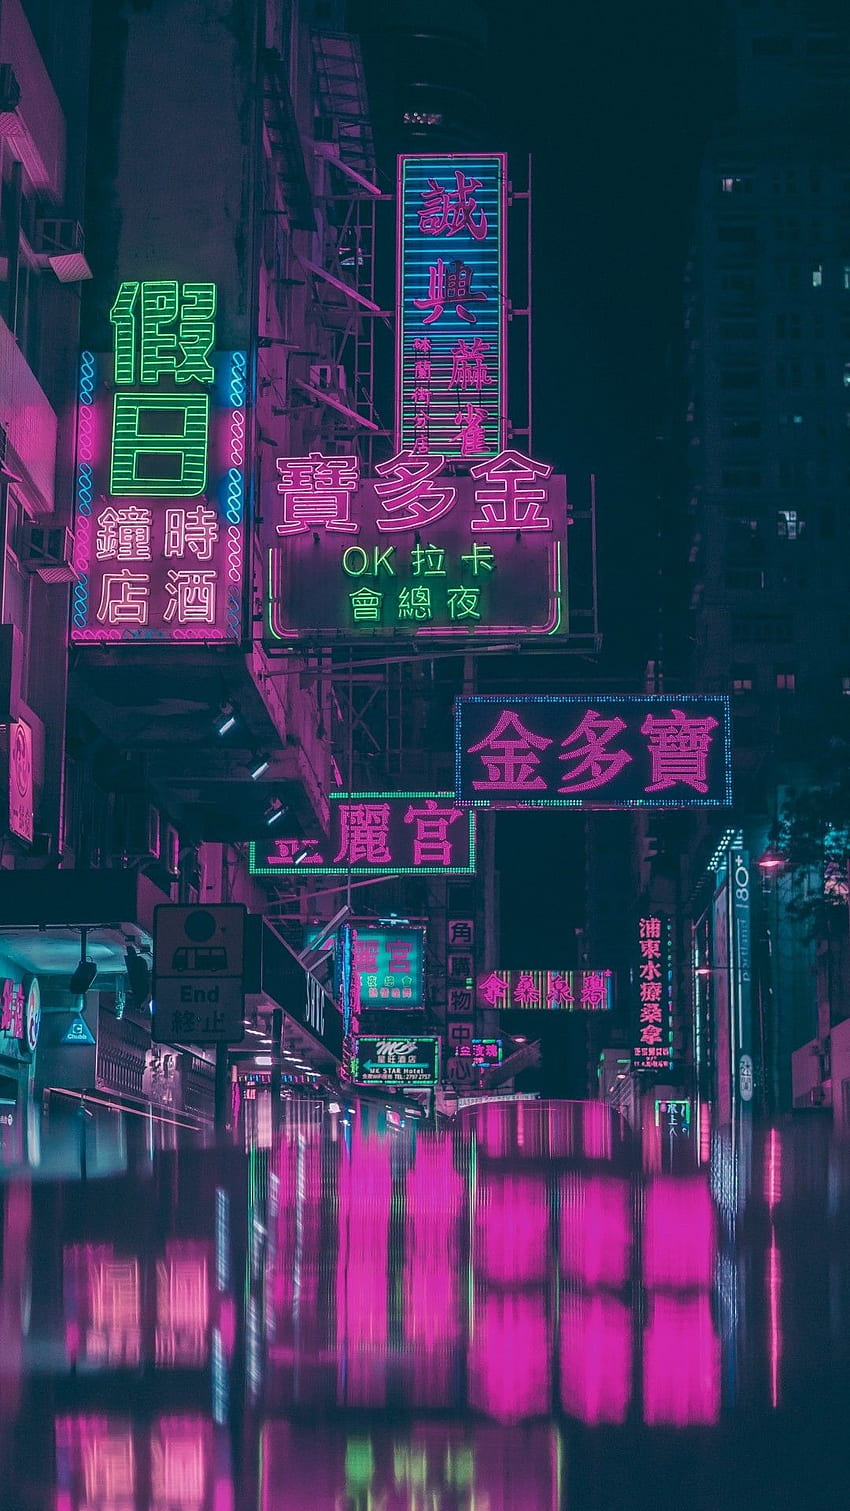 Hong Kong, Urban, Night, Shop Signs, Neon Lights, Buildings for iPhone 8, iPhone 7 Plus, iPhone 6+, Sony Xperia Z, HTC One HD phone wallpaper